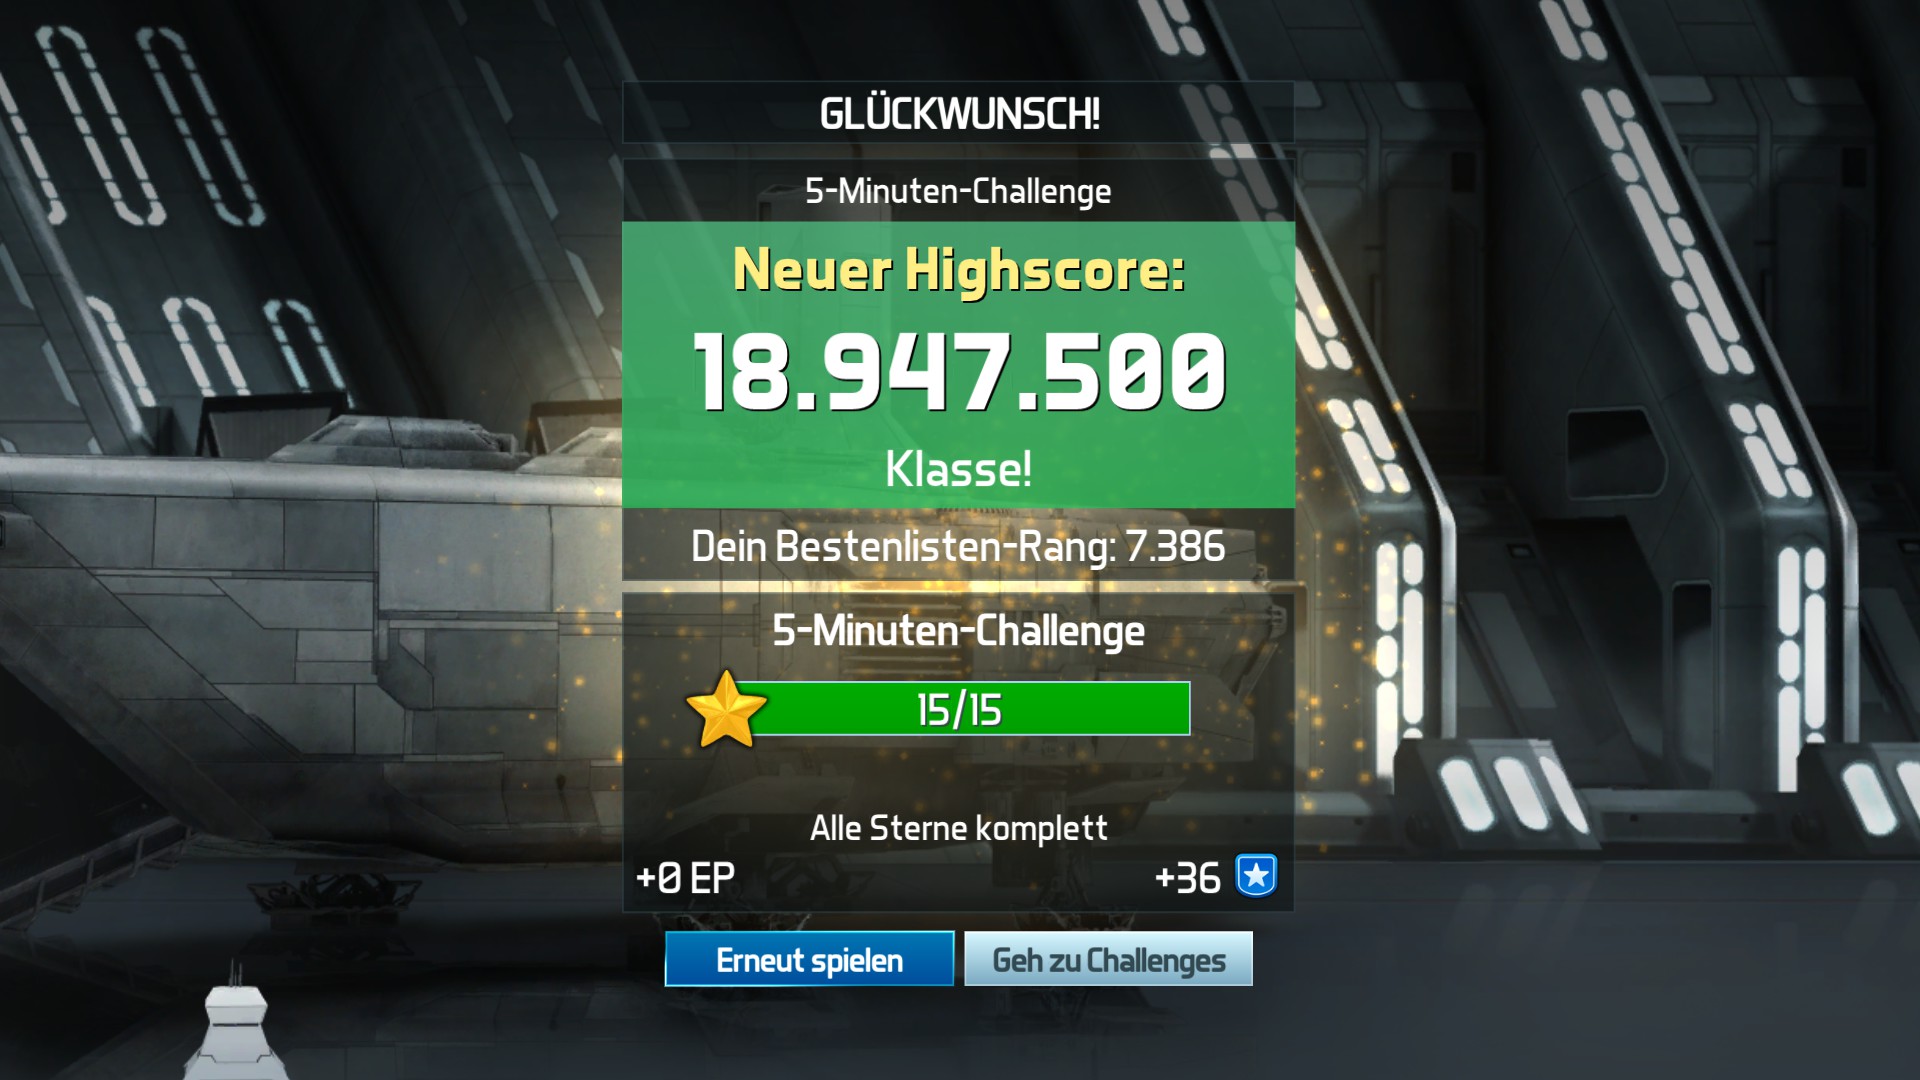 e2e4: Pinball FX3: Star Wars Pinball: Might Of The First Order [5 Minute] (PC) 18,947,500 points on 2022-09-18 09:40:08